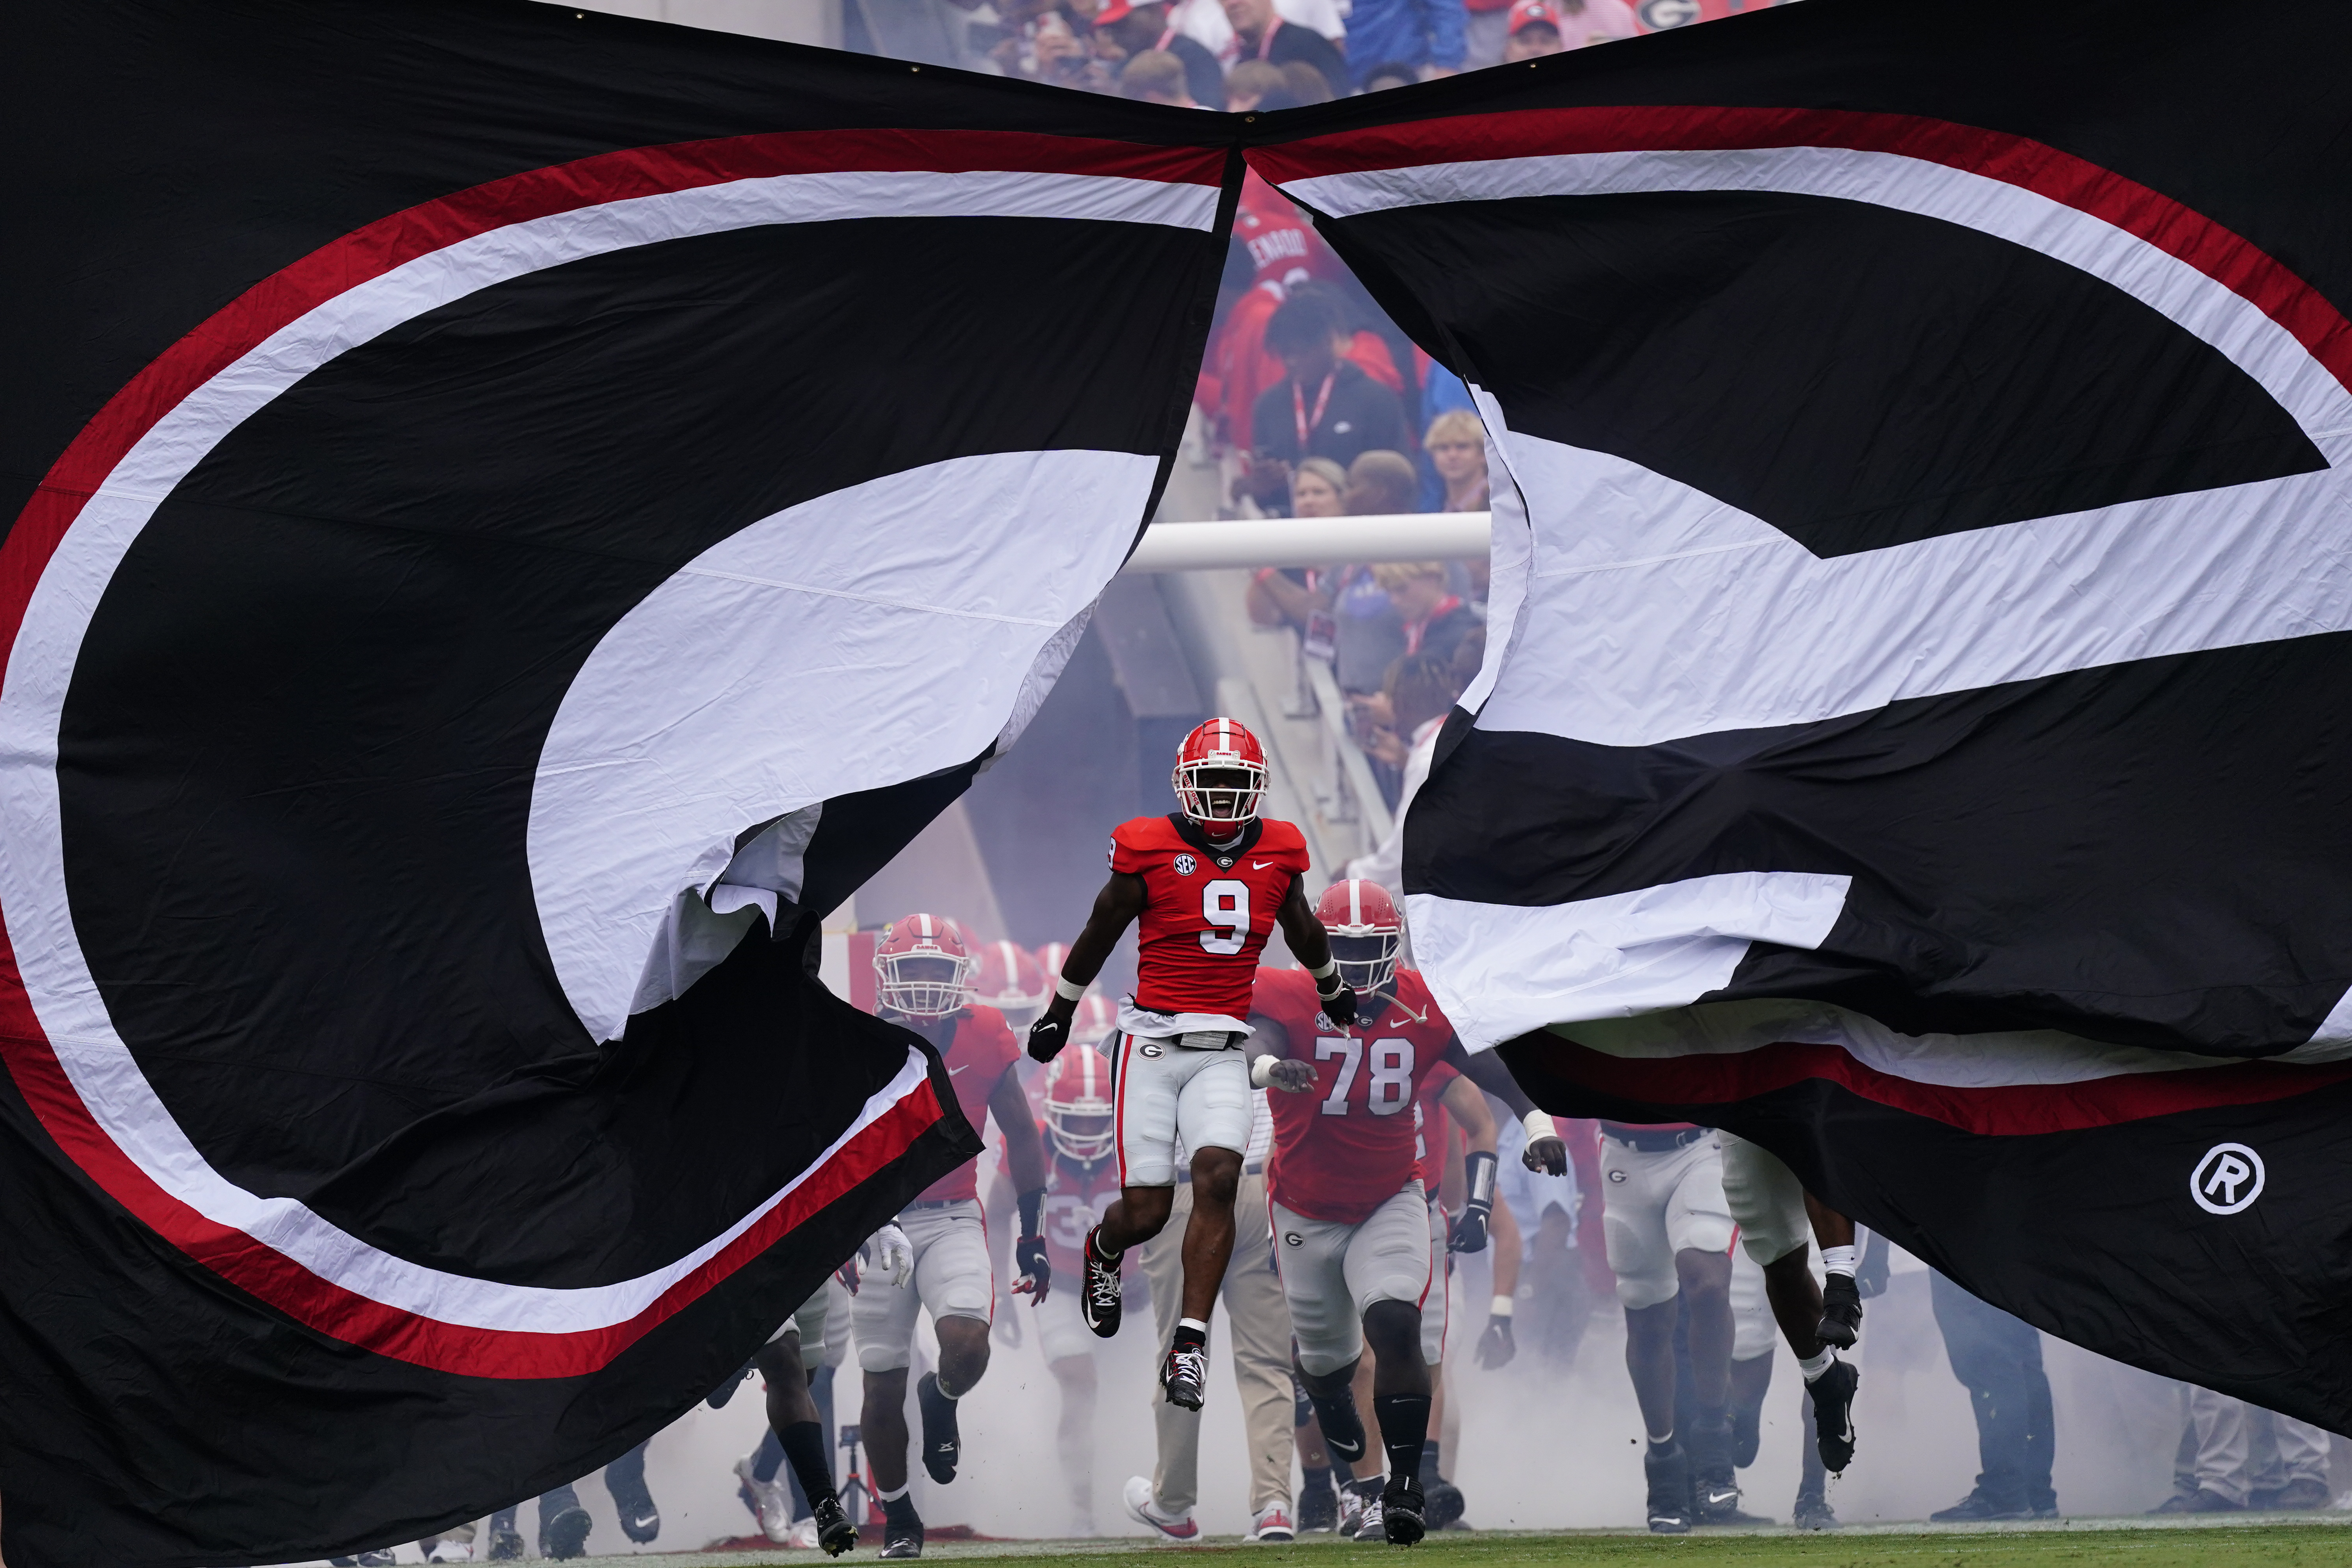 UGA football players hold meeting 'owning what we've done' after